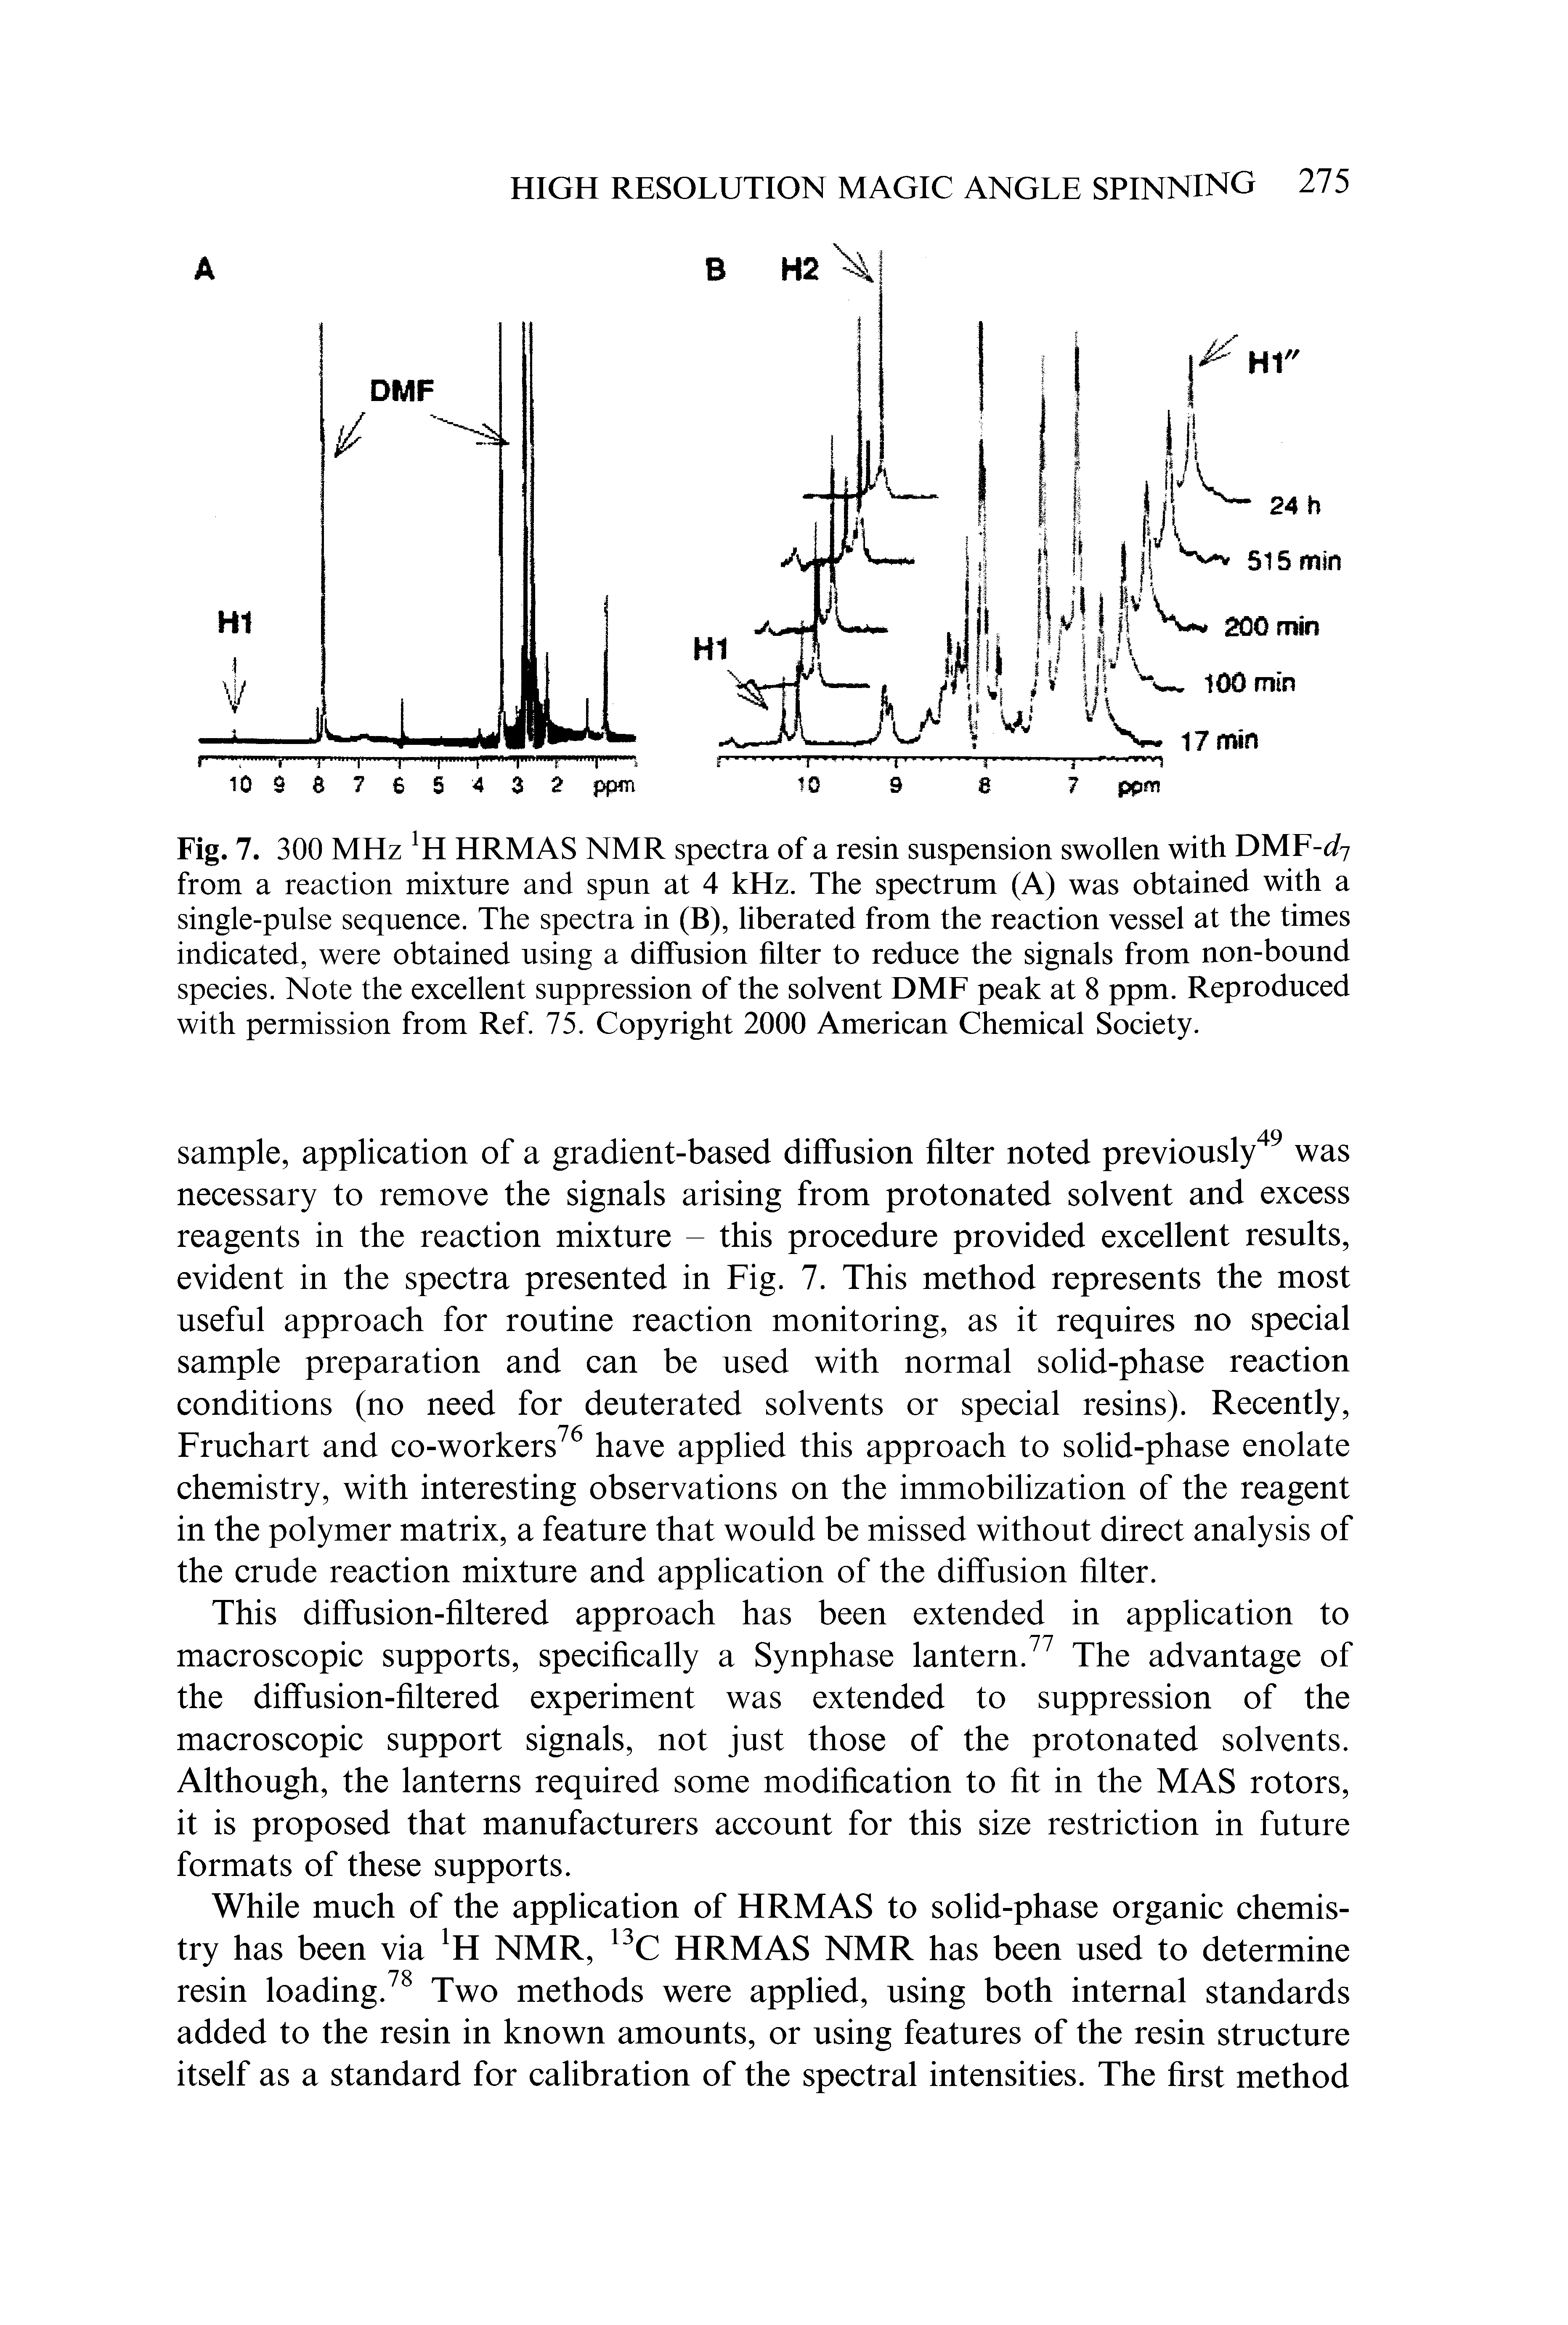 Fig. 7. 300 MHz H HRMAS NMR spectra of a resin suspension swollen with DMF-dq from a reaction mixture and spun at 4 kHz. The spectrum (A) was obtained with a single-pulse sequence. The spectra in (B), liberated from the reaction vessel at the times indicated, were obtained using a diffusion filter to reduce the signals from non-bound species. Note the excellent suppression of the solvent DMF peak at 8 ppm. Reproduced with permission from Ref. 75. Copyright 2000 American Chemical Society.